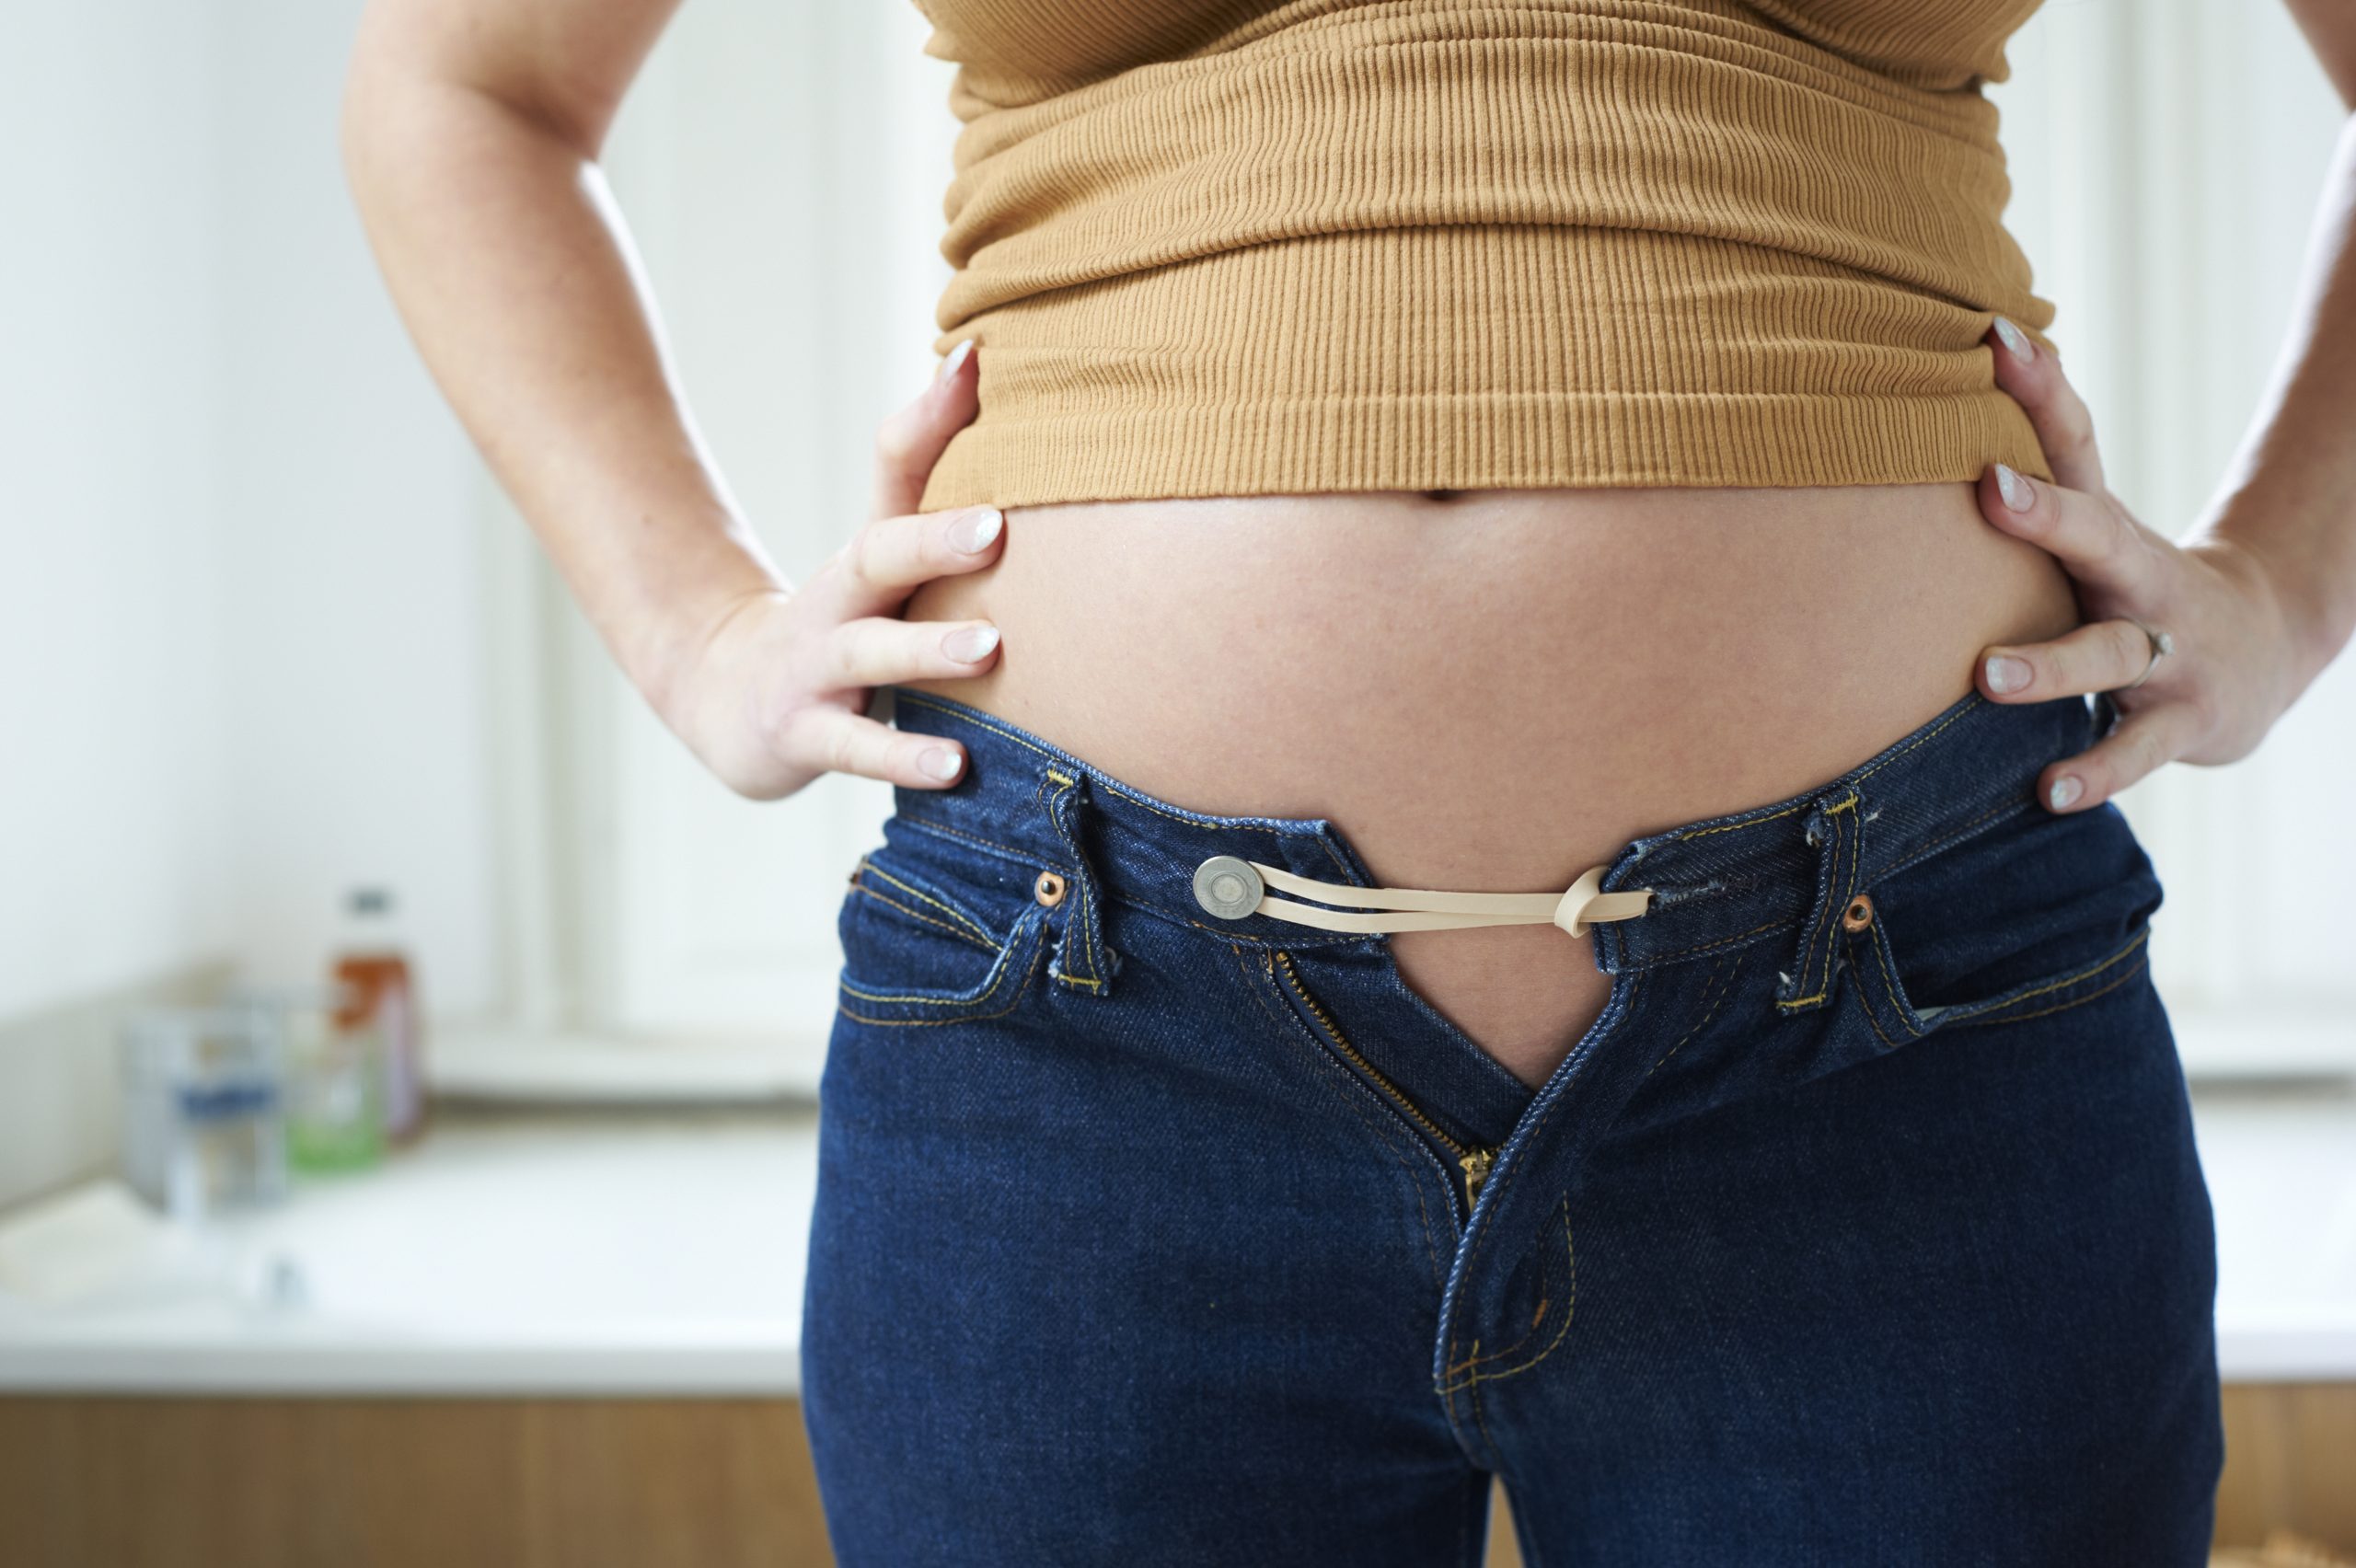 9 easy tips to get rid of bloating and get a flat tummy according to  experts